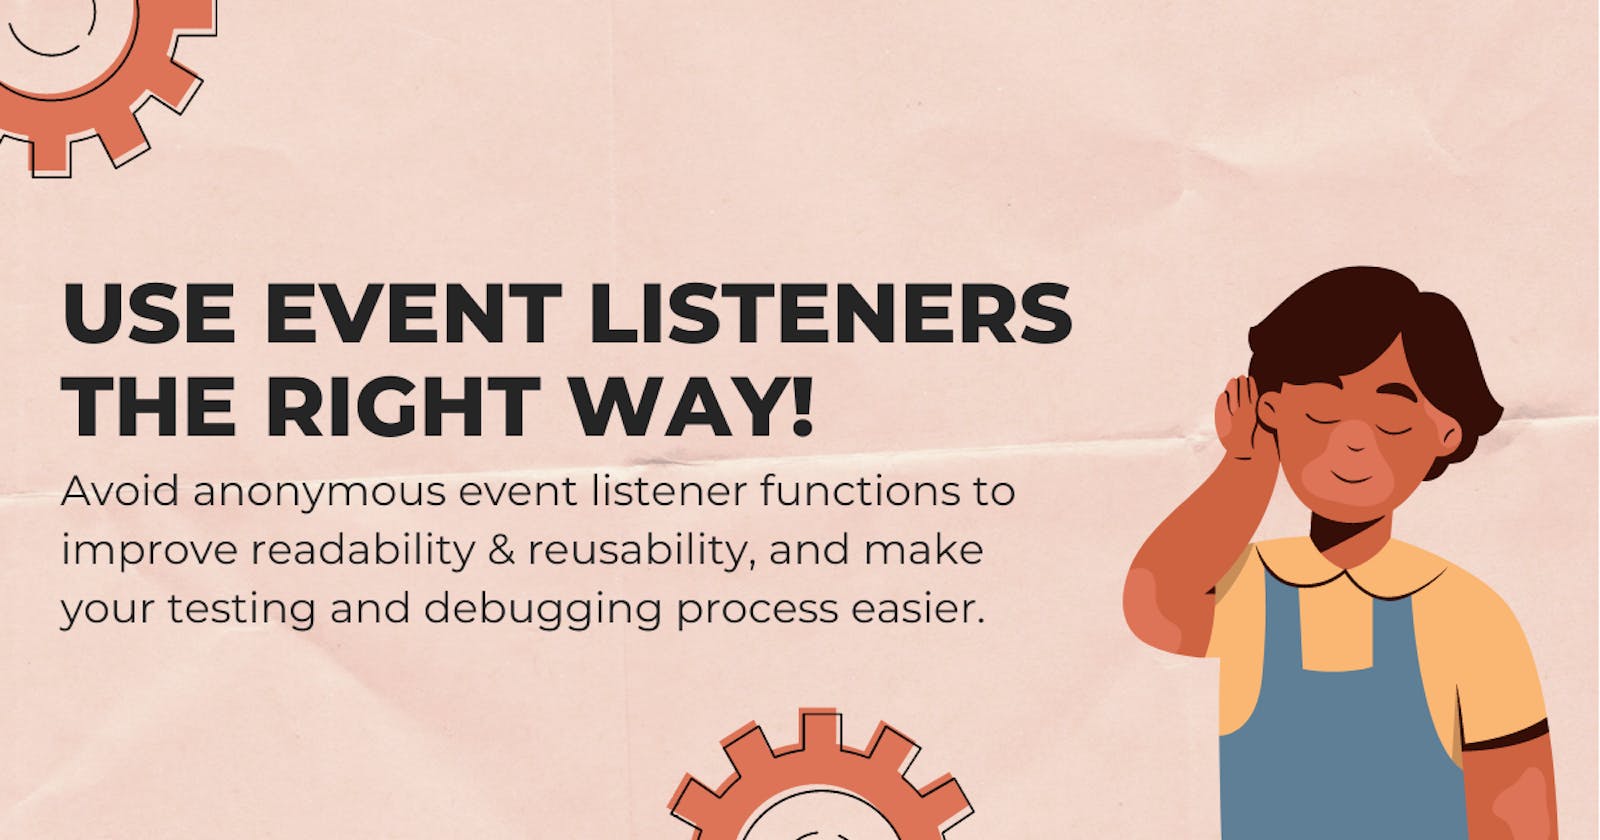 Use Event Listeners The Right Way!